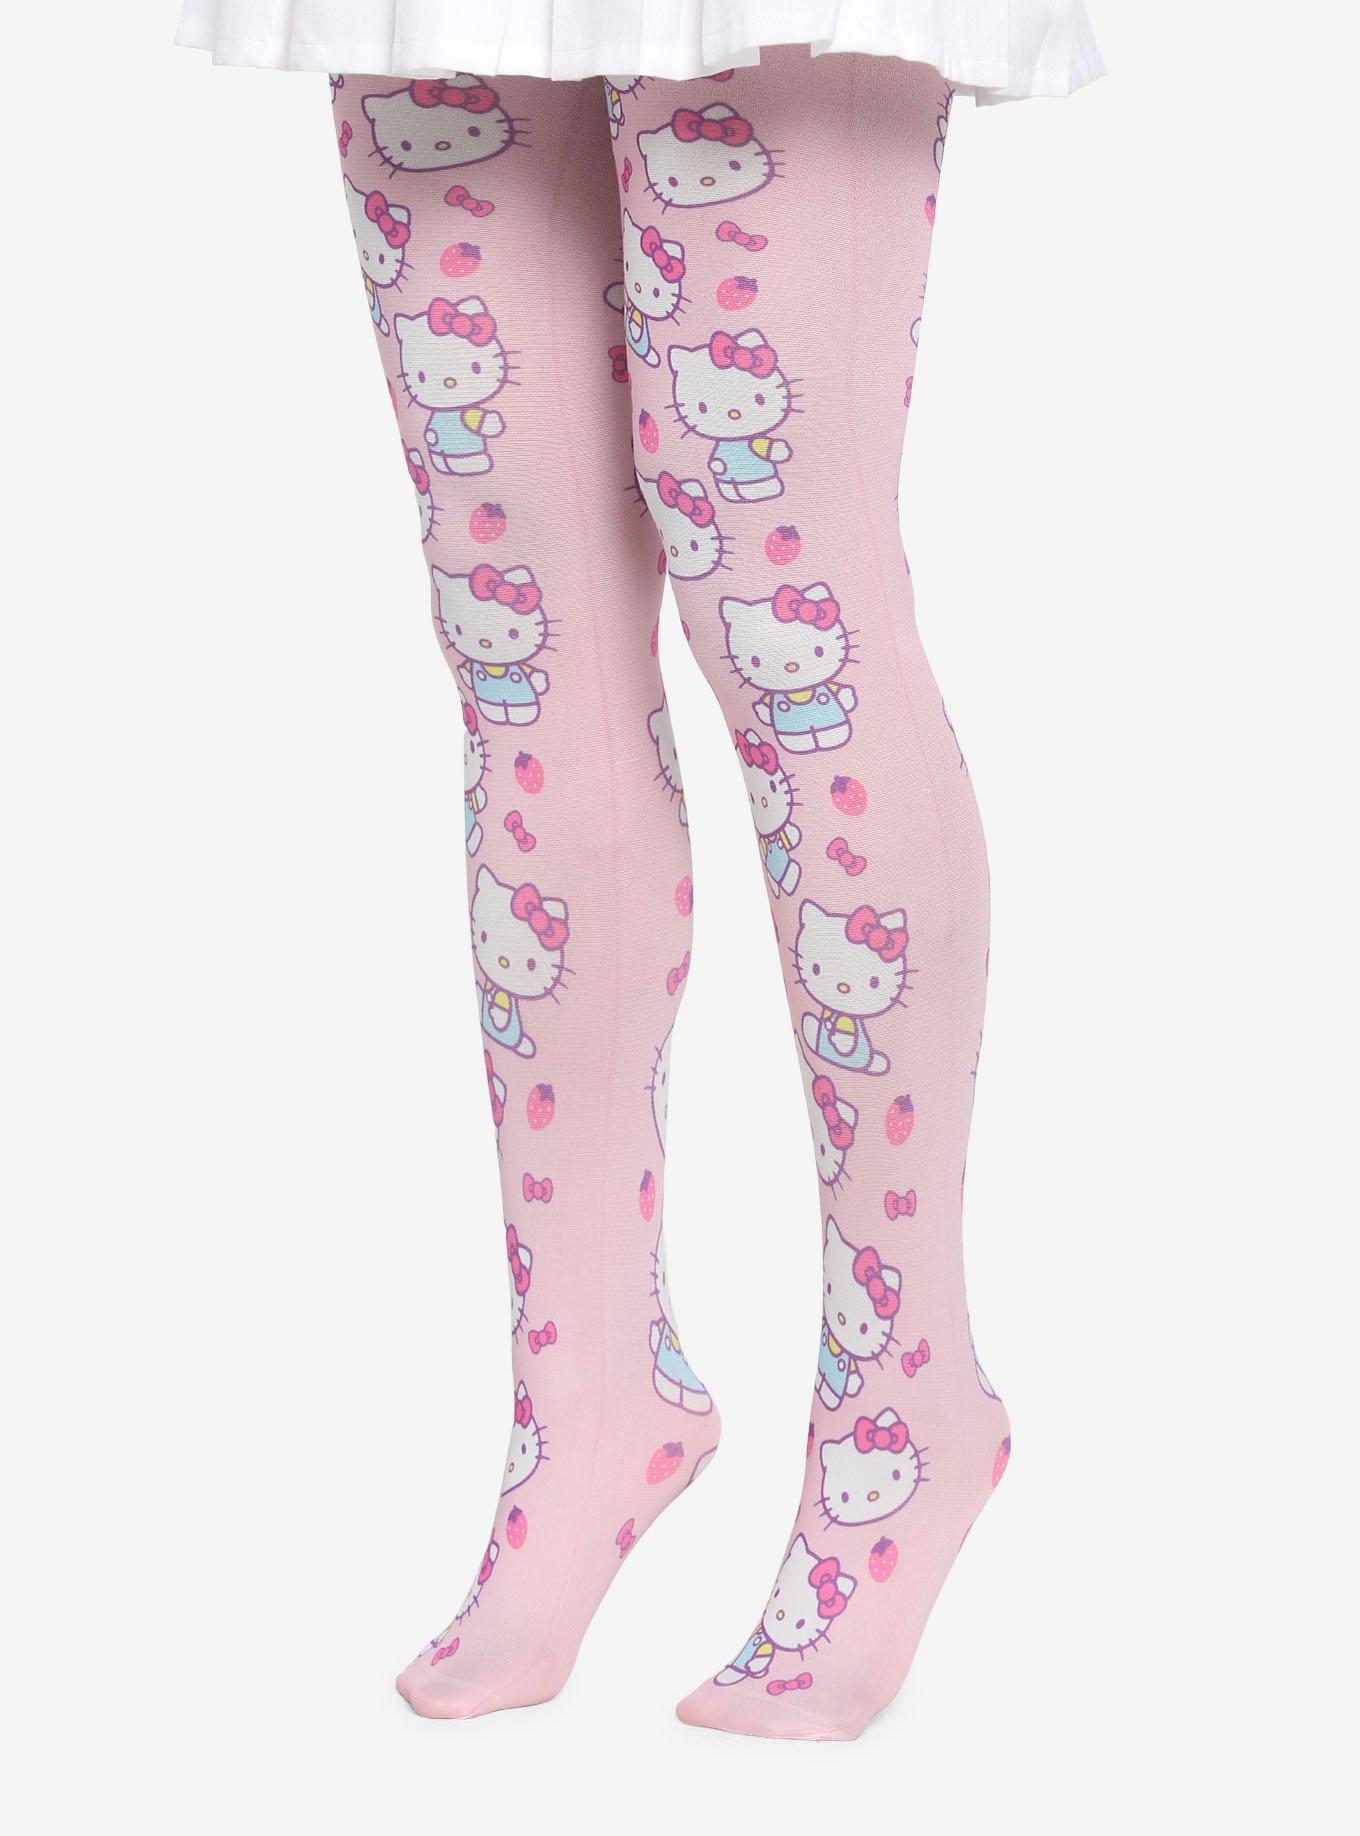 Pop Culture Tights For The Geeky Ladies